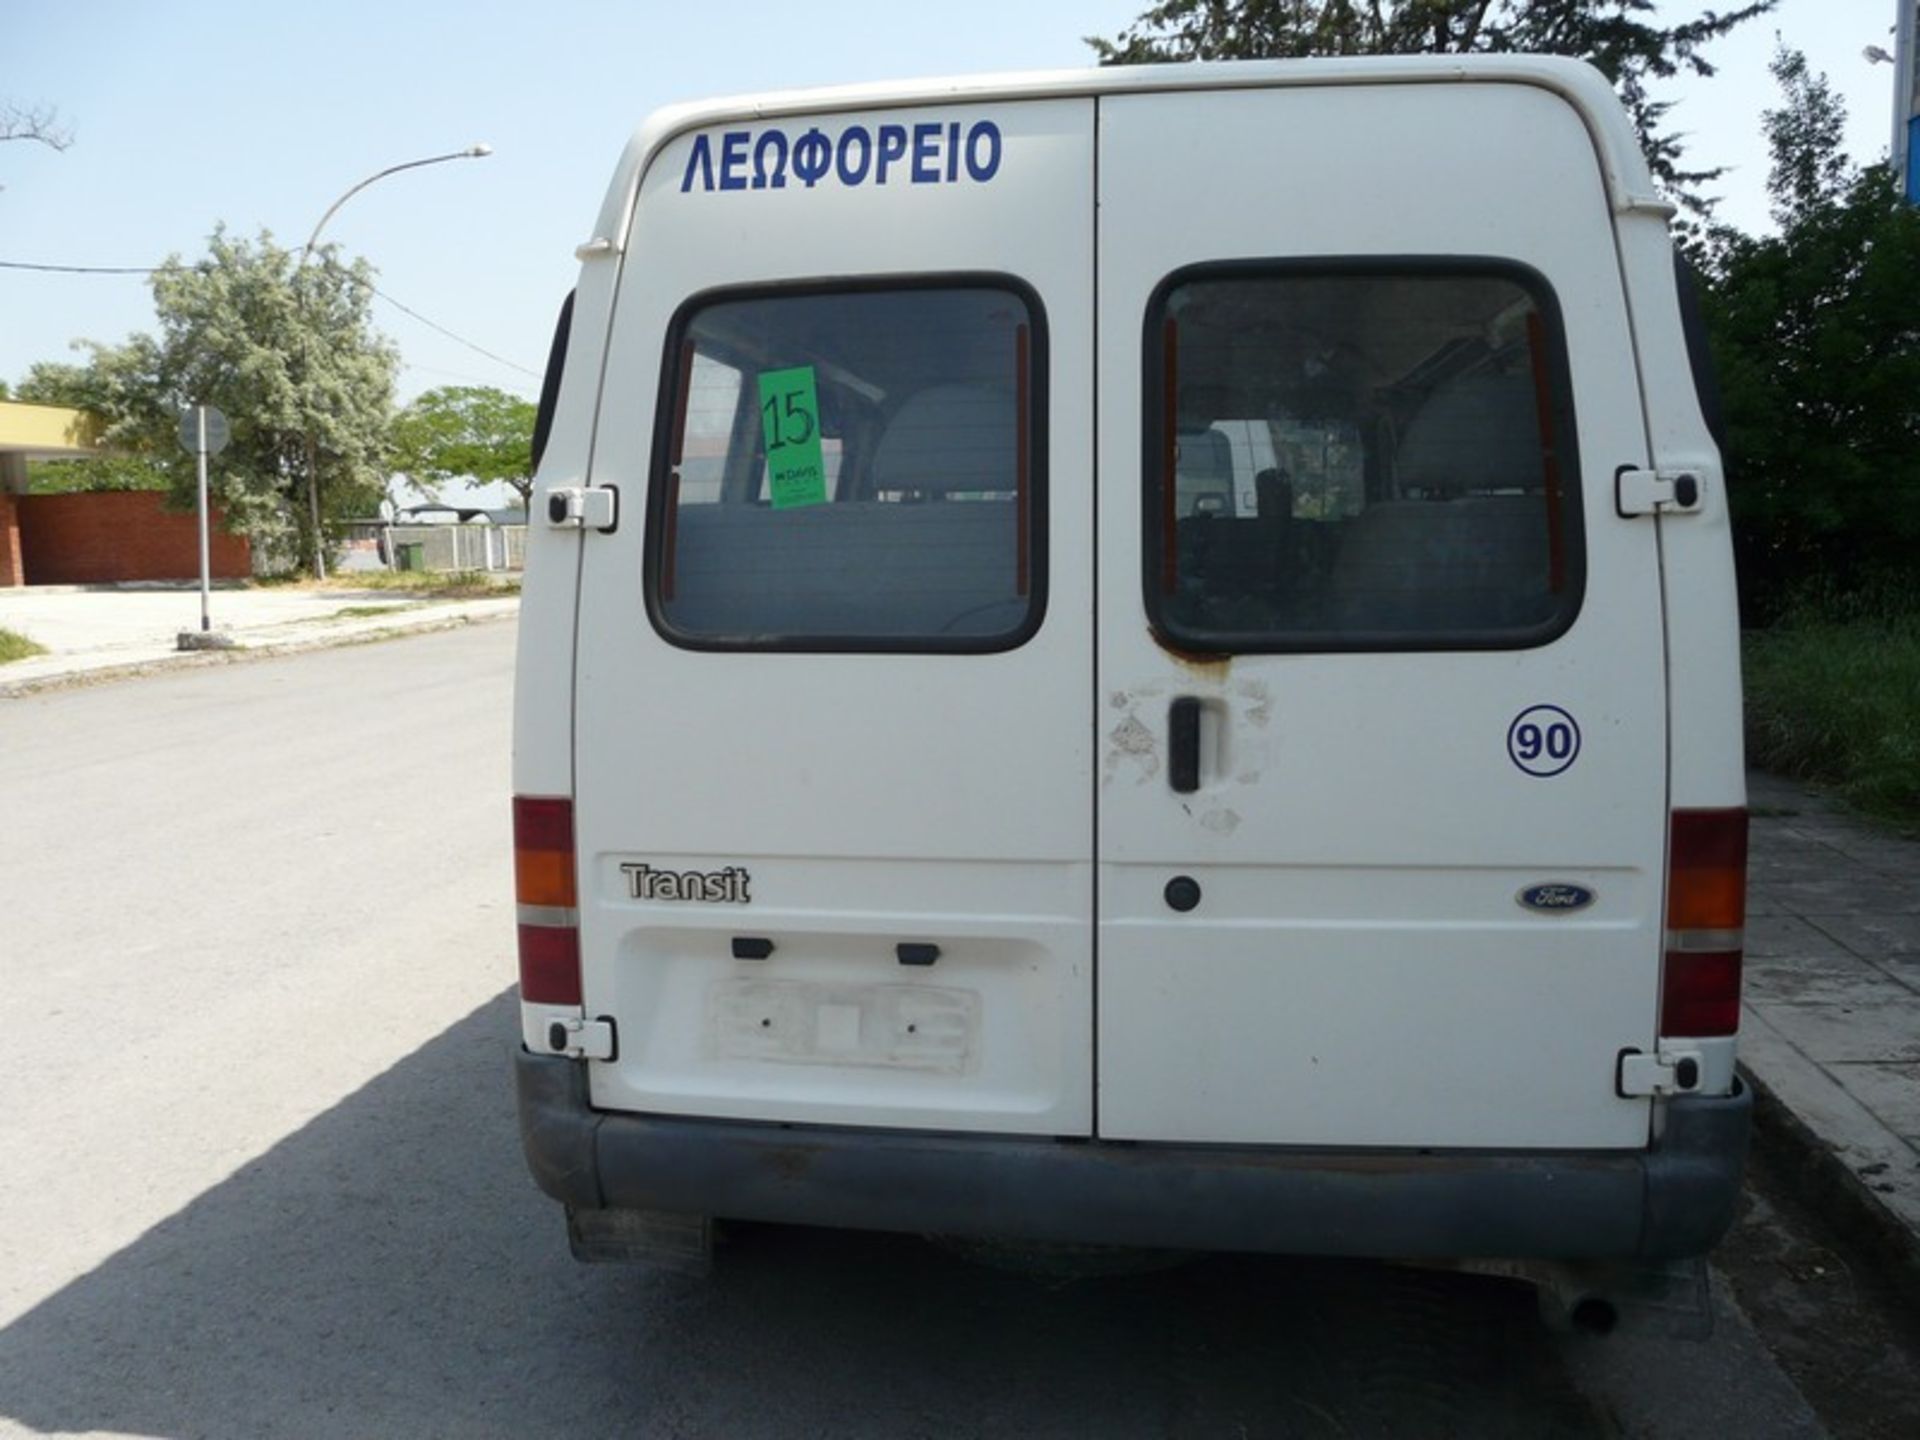 FORD TRANSIT, buss115, diesel, KM 146159, 11 seats, REG NEE 7504, Year: 1997 (Located in Greece - - Image 5 of 9